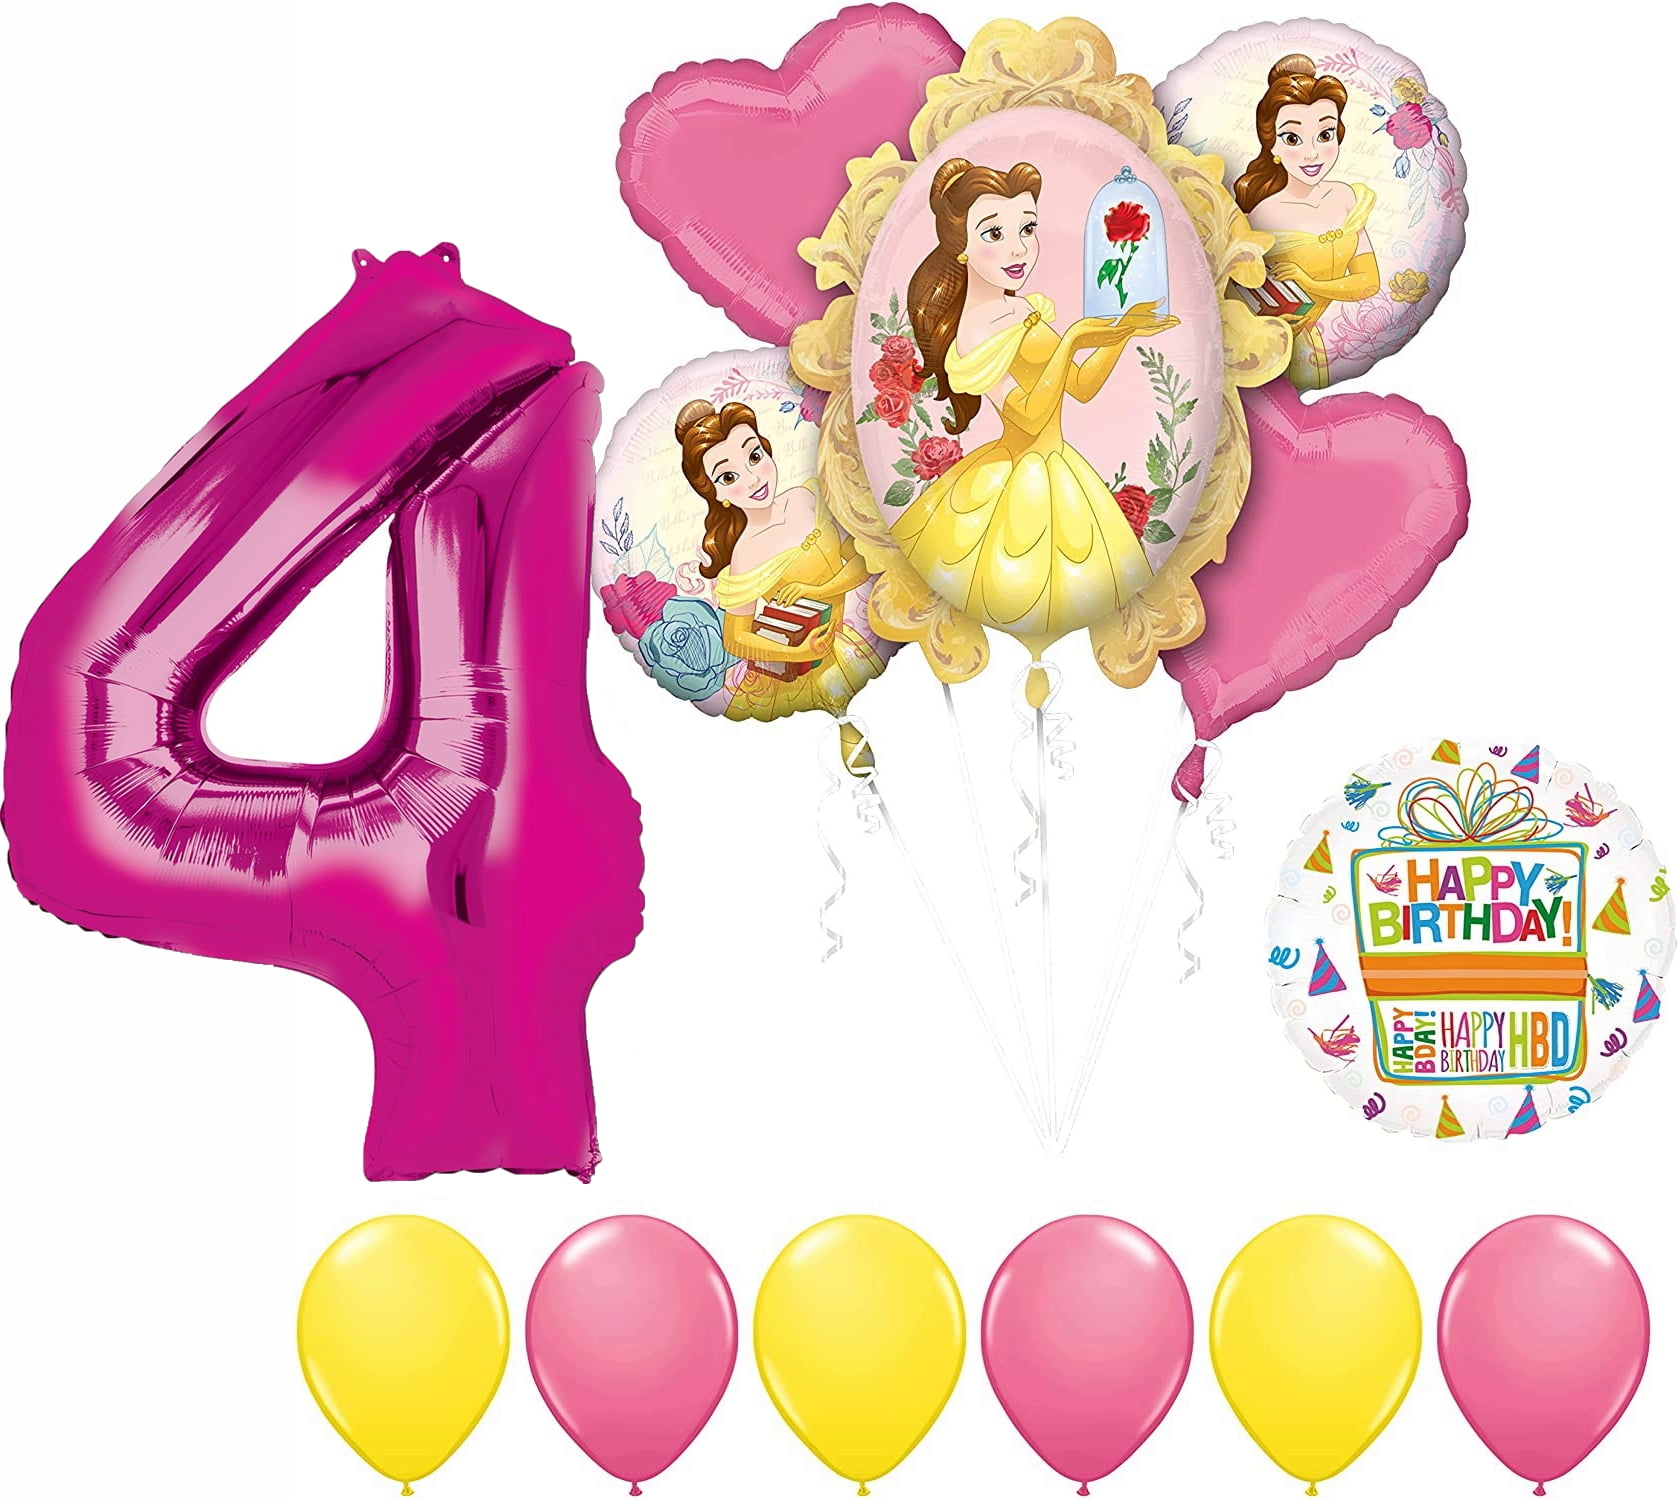 Beauty and Beast Party Supply and Balloon Bundle 